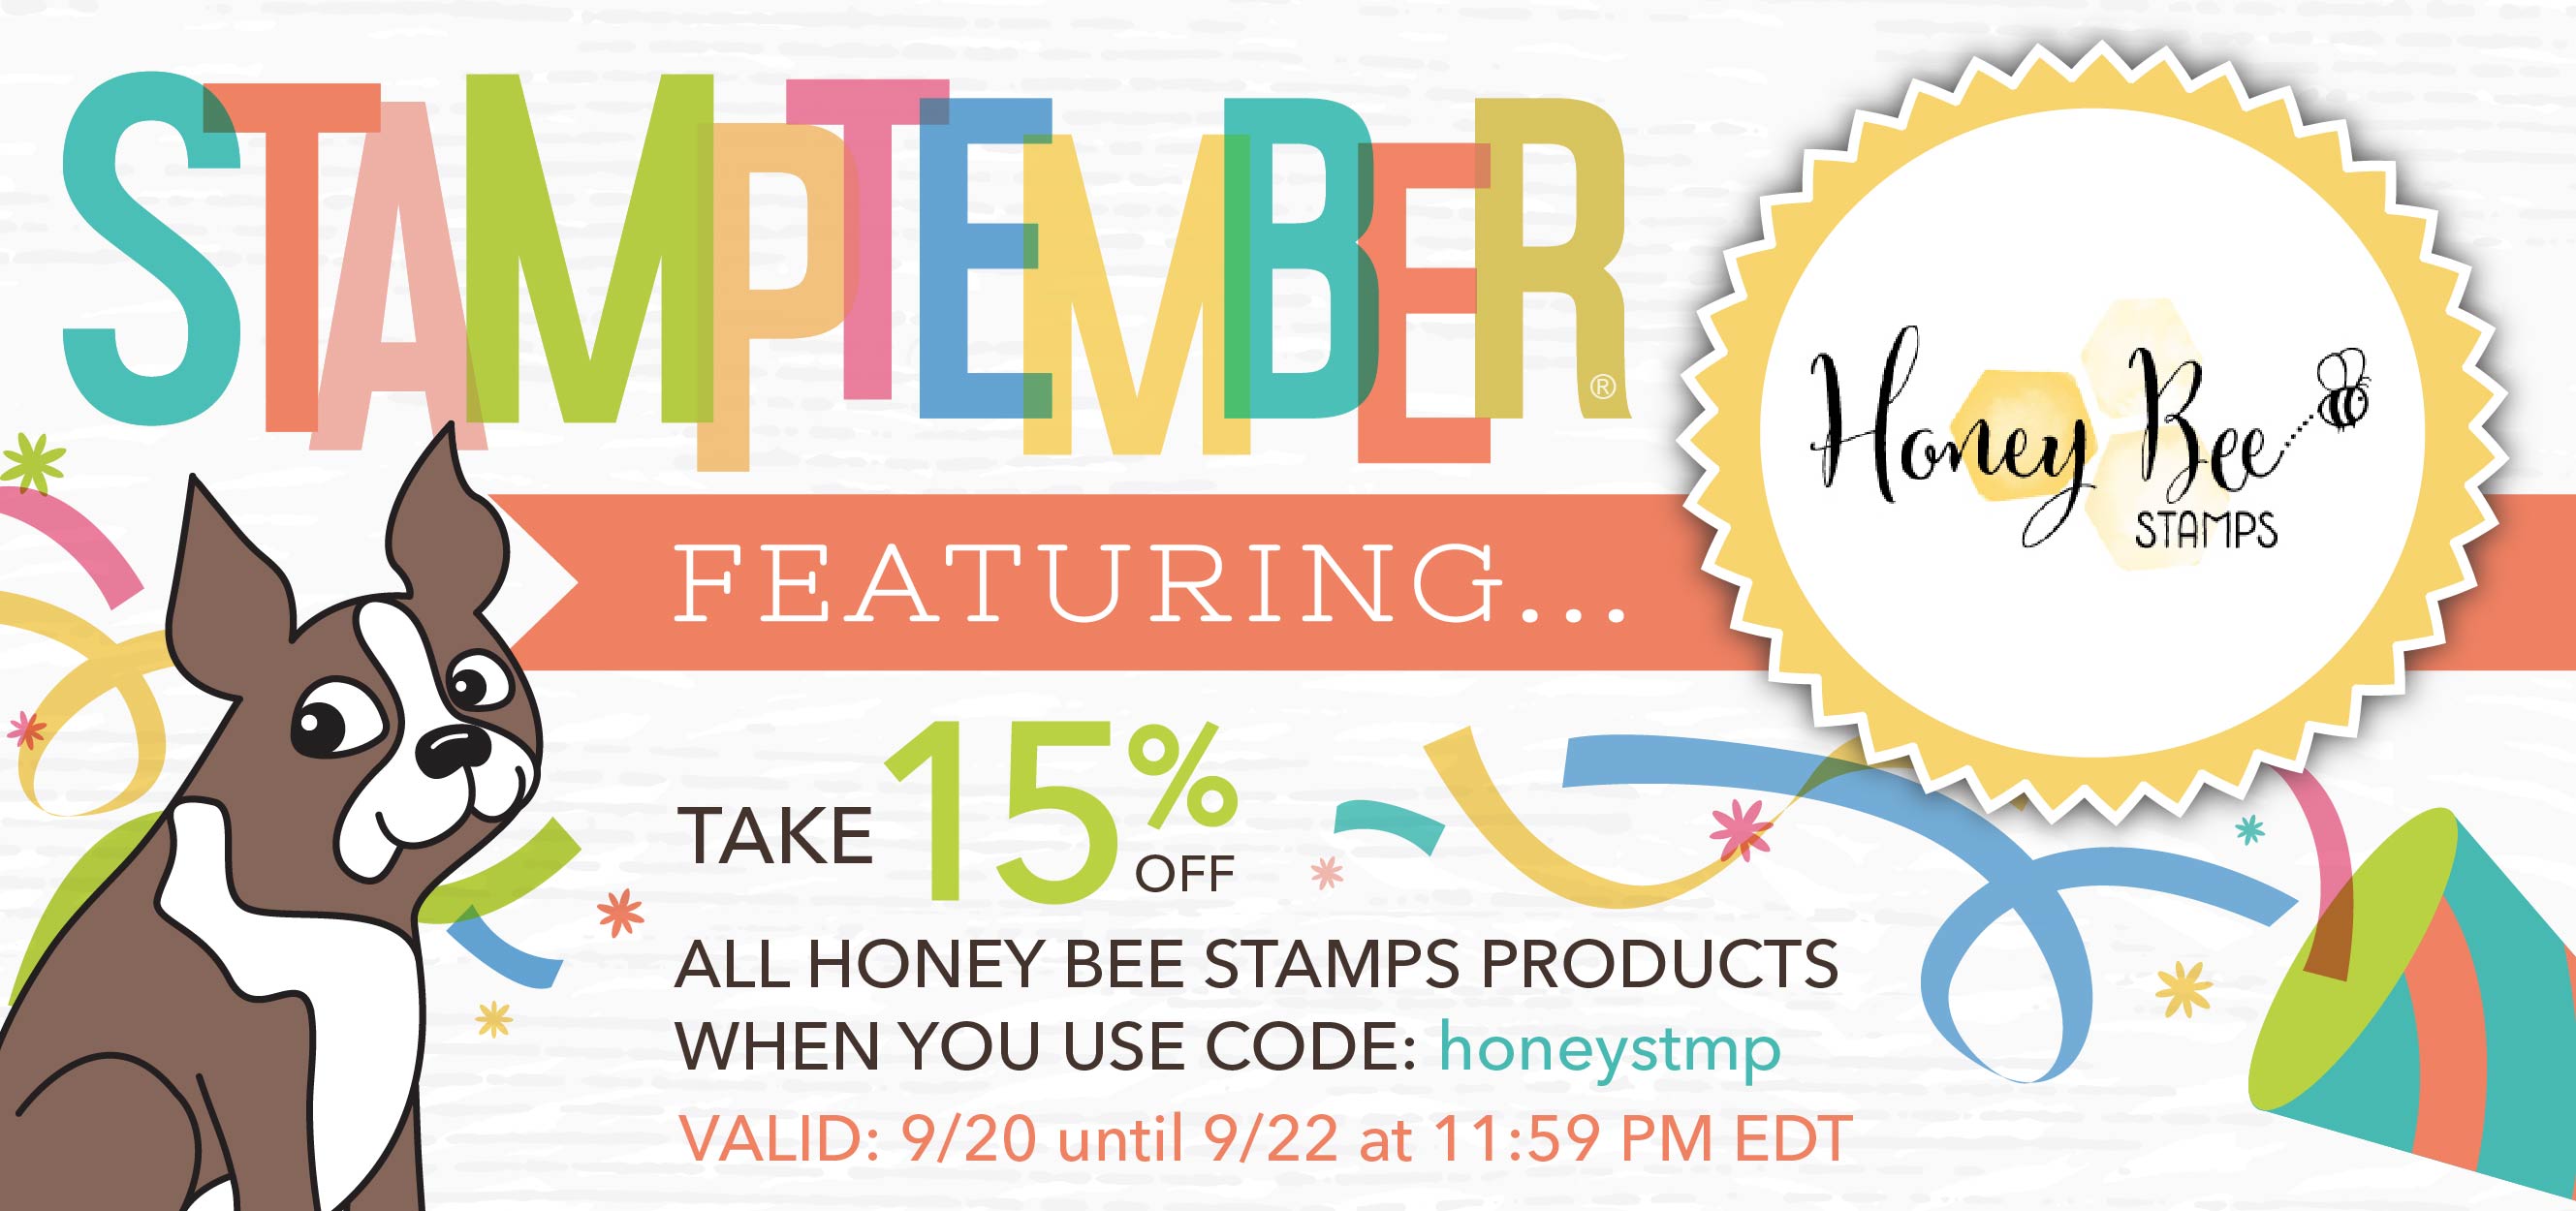 feature_master_honey-bee-stamps-01